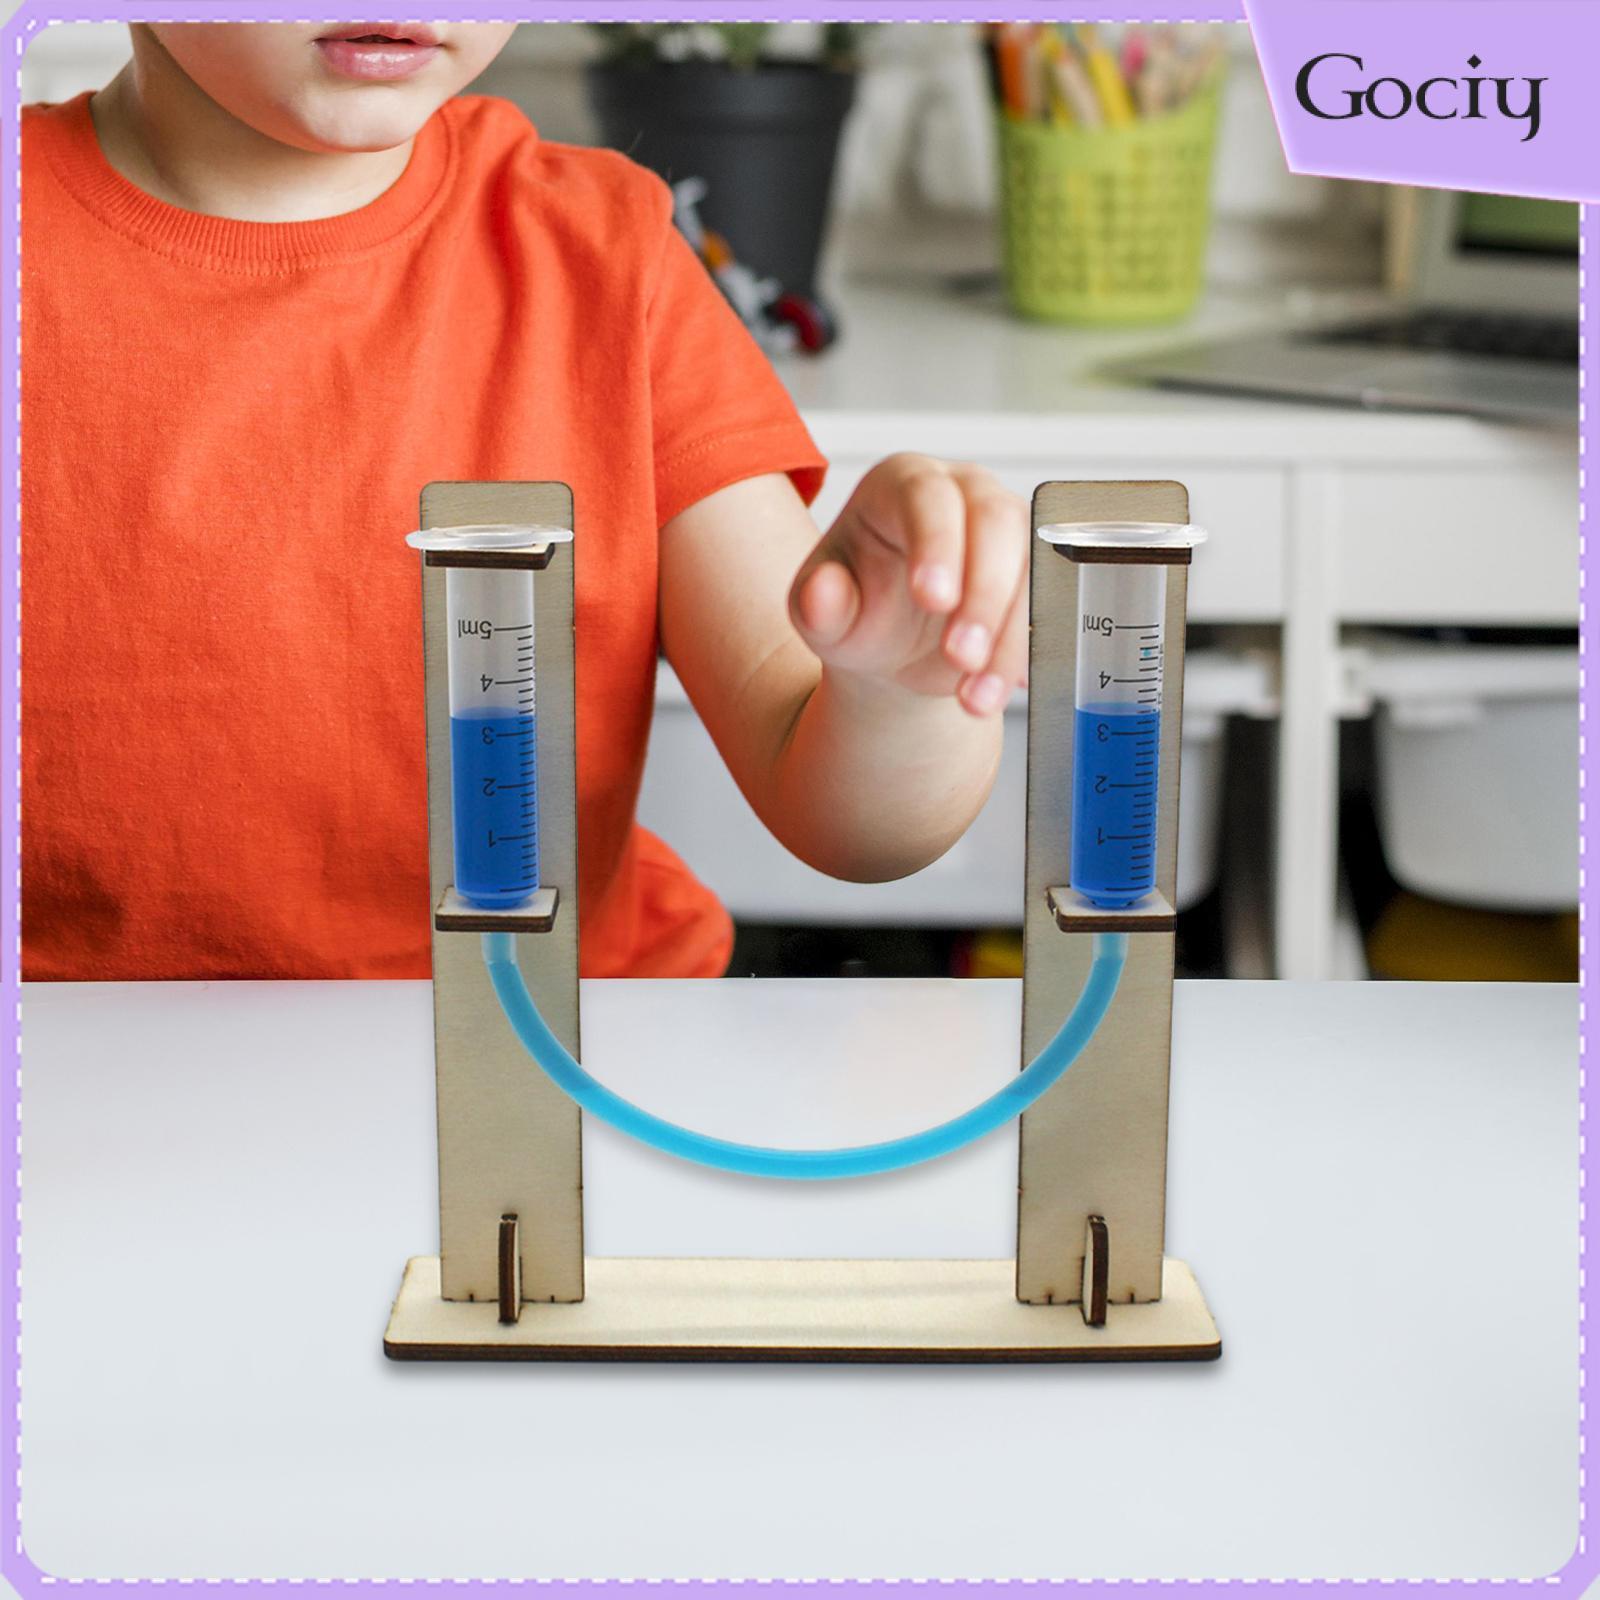 Gociy Science Diy Toys Science Experiment Toys for Activity Learning